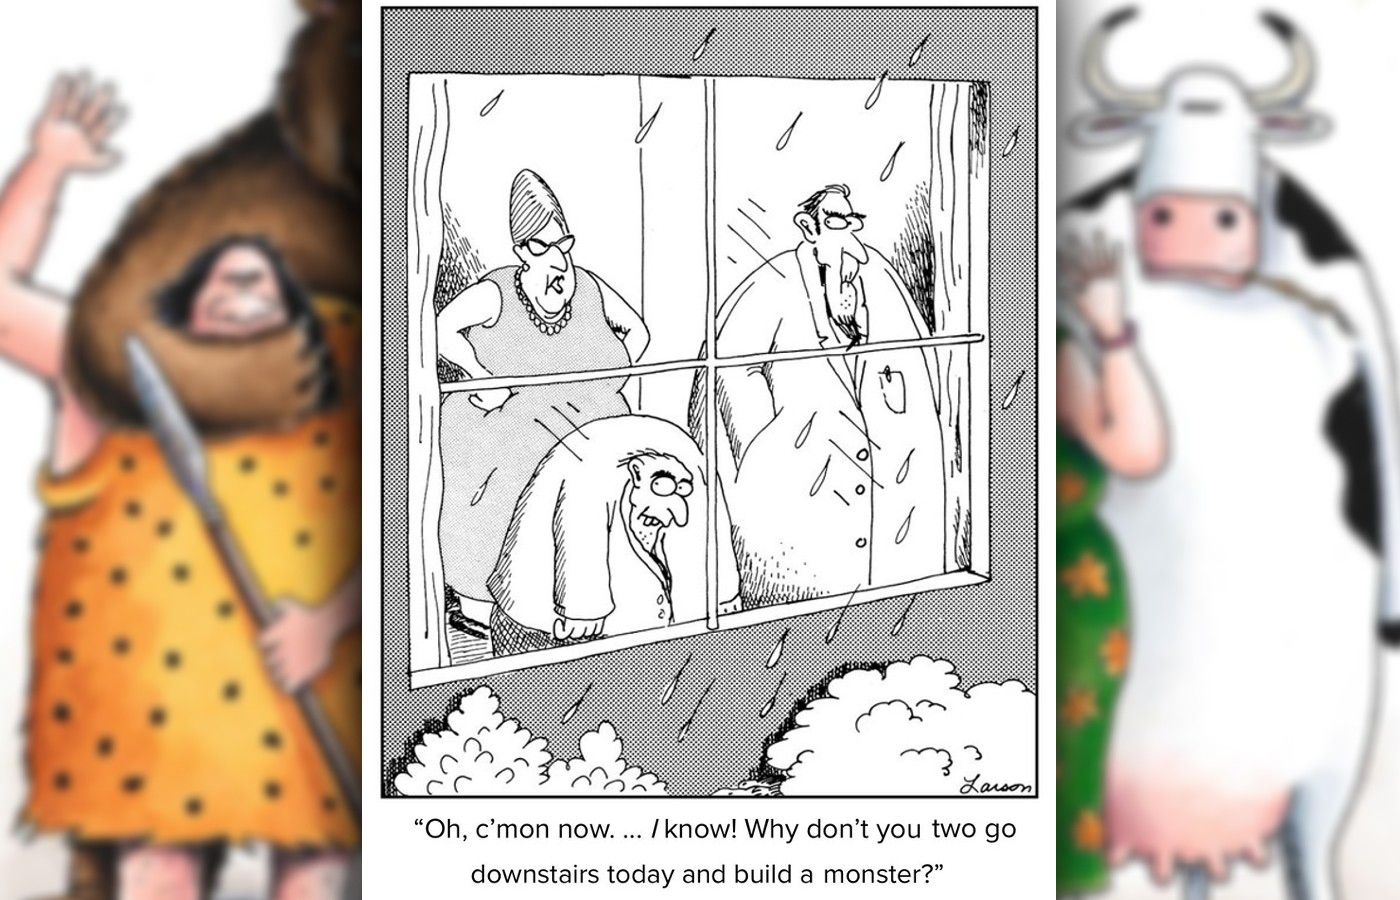 far side comic where frankenstein and igor are bored on a rainy day